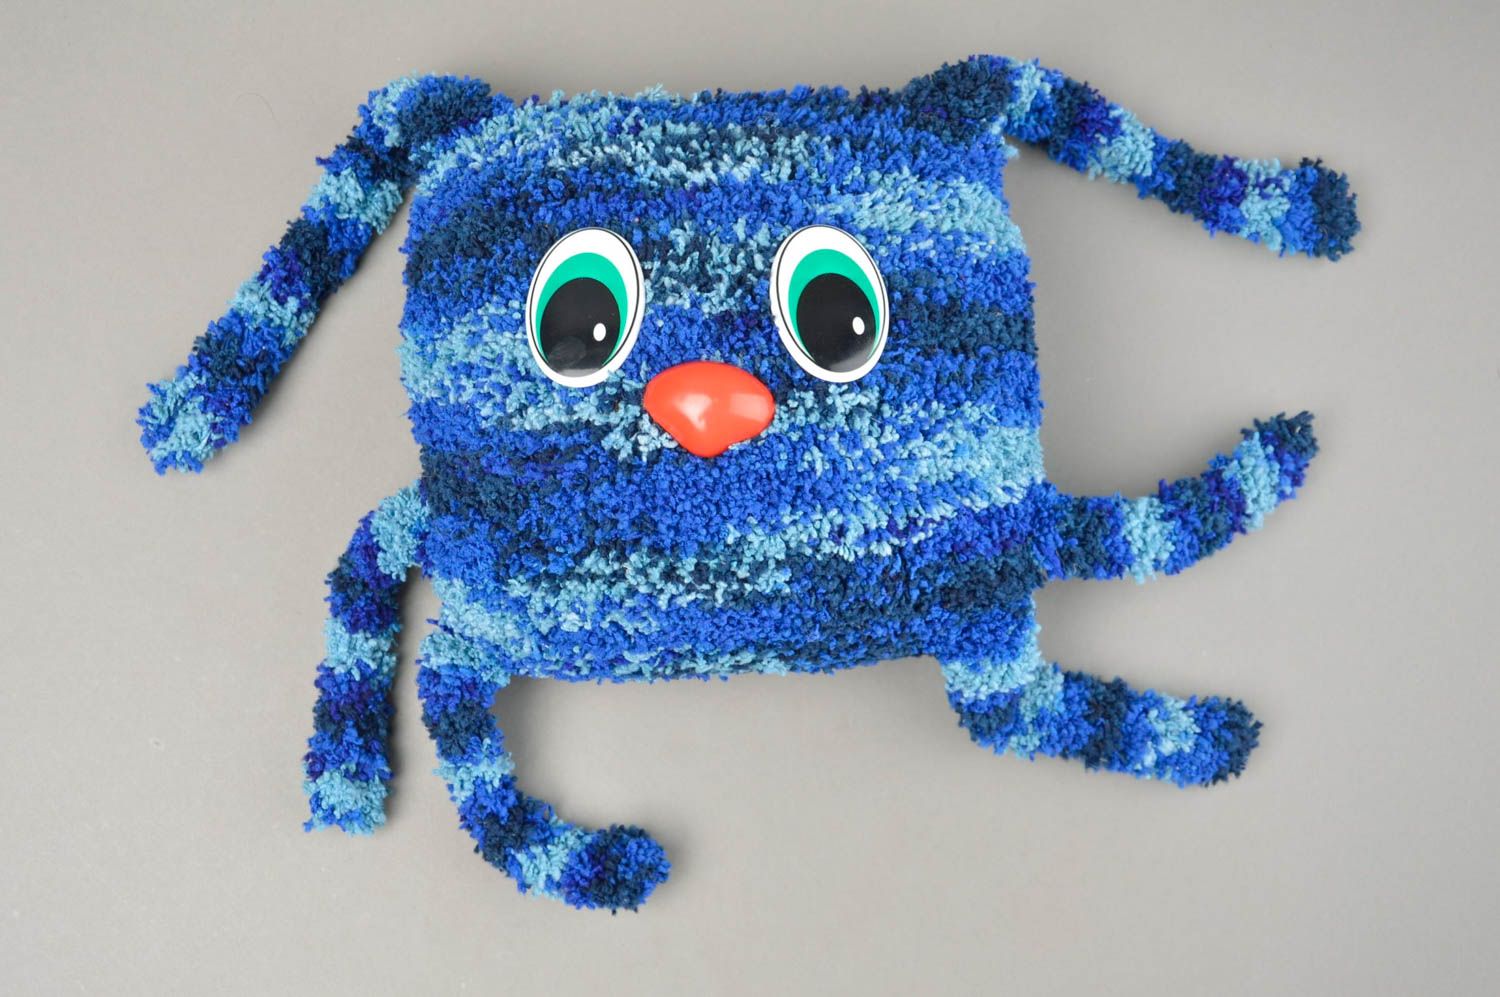 Handmade blue soft toy crocheted stylish souvenirs cute presents for kids photo 2